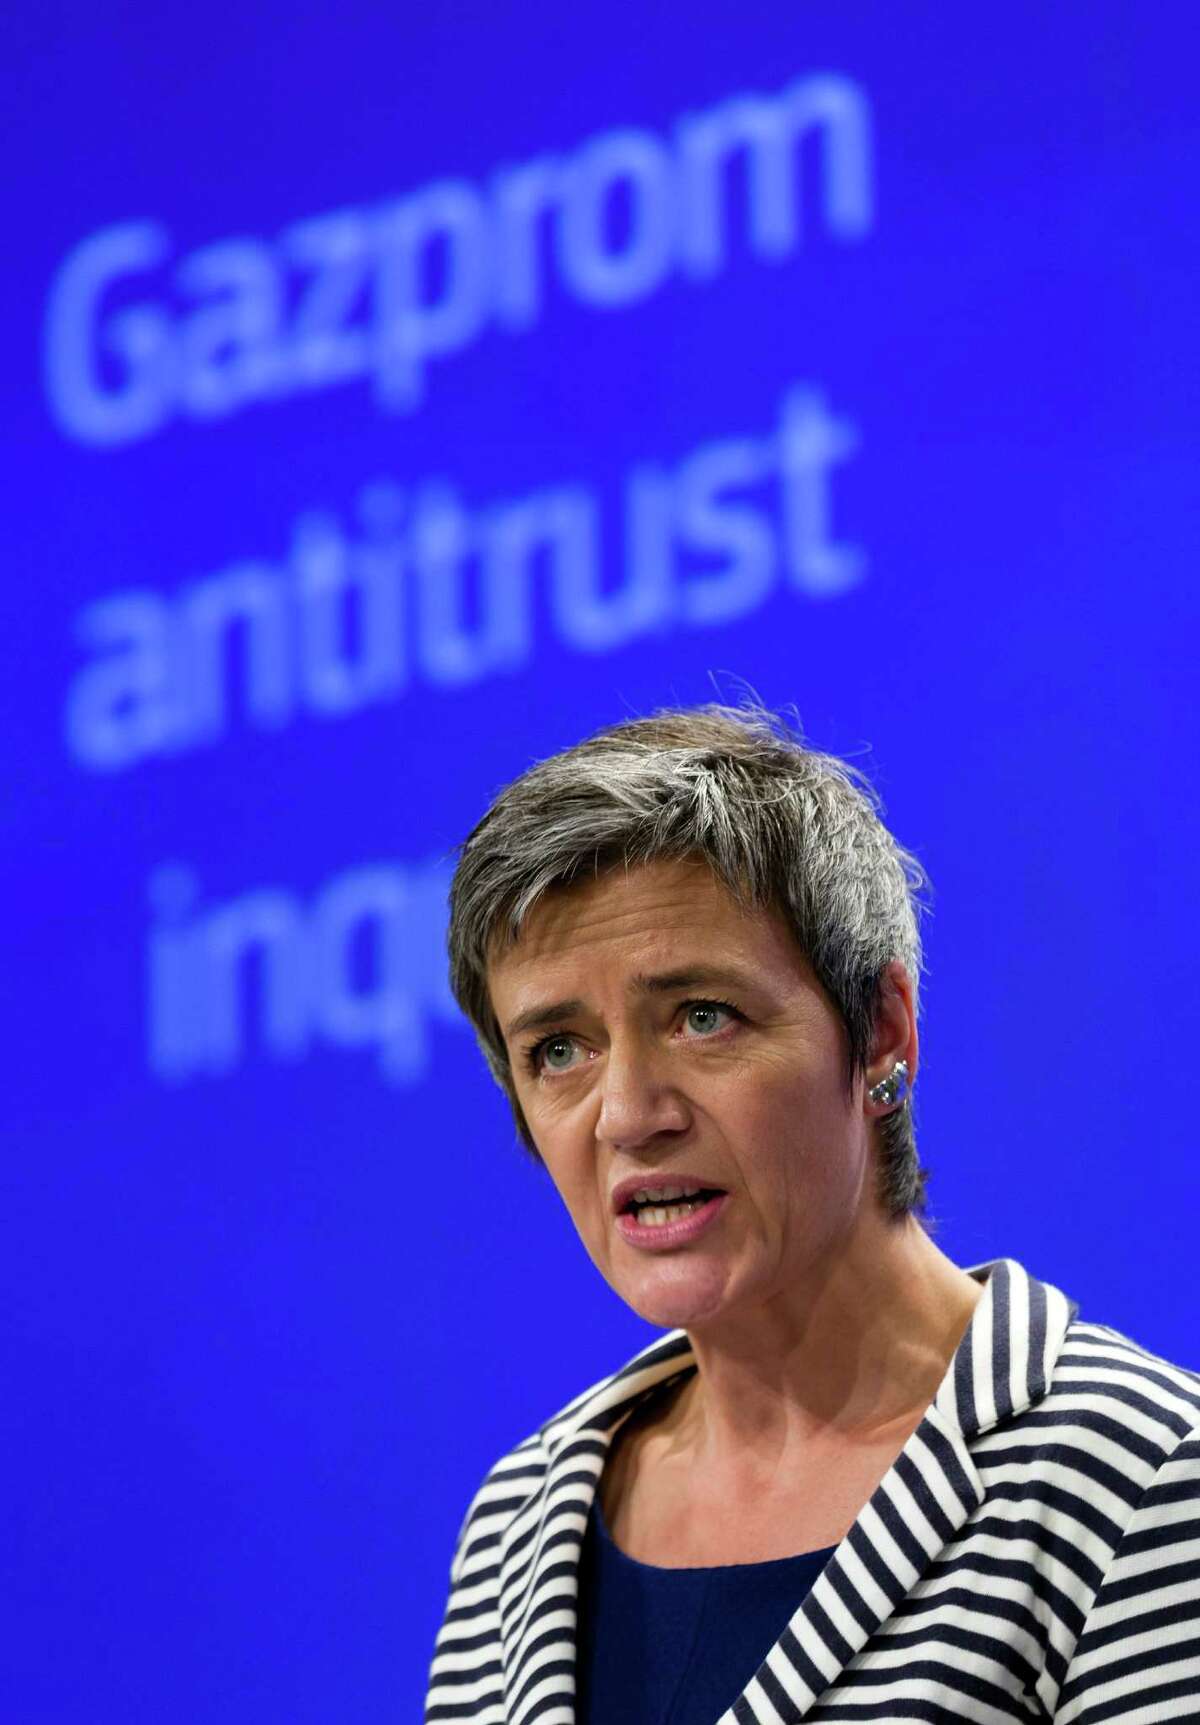 European Commissioner for Competition Margrethe Vestager speaks during a media conference at EU headquarters in Brussels on Wednesday, April 22, 2015. The European Union on Wednesday opened an antitrust case against Russia's state-controlled Gazprom energy giant amid worsening relations between Brussels and Moscow. (AP Photo/Thierry Monasse)